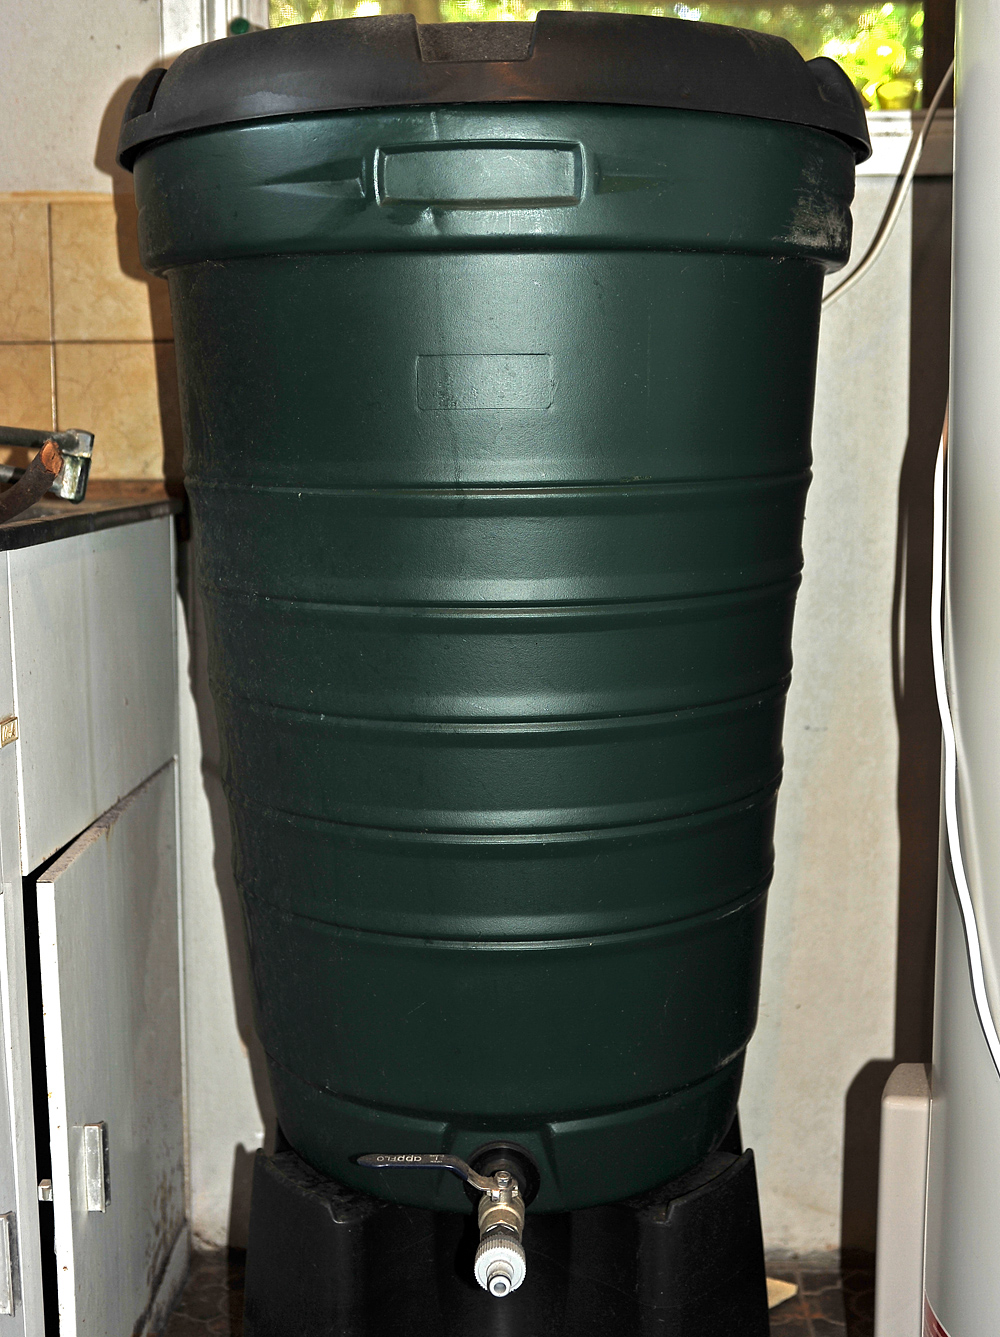 These small, cheap water tanks can be used indoors or outdoors. When empty they are easily carried by one person, and can be transported in an ordinary car.